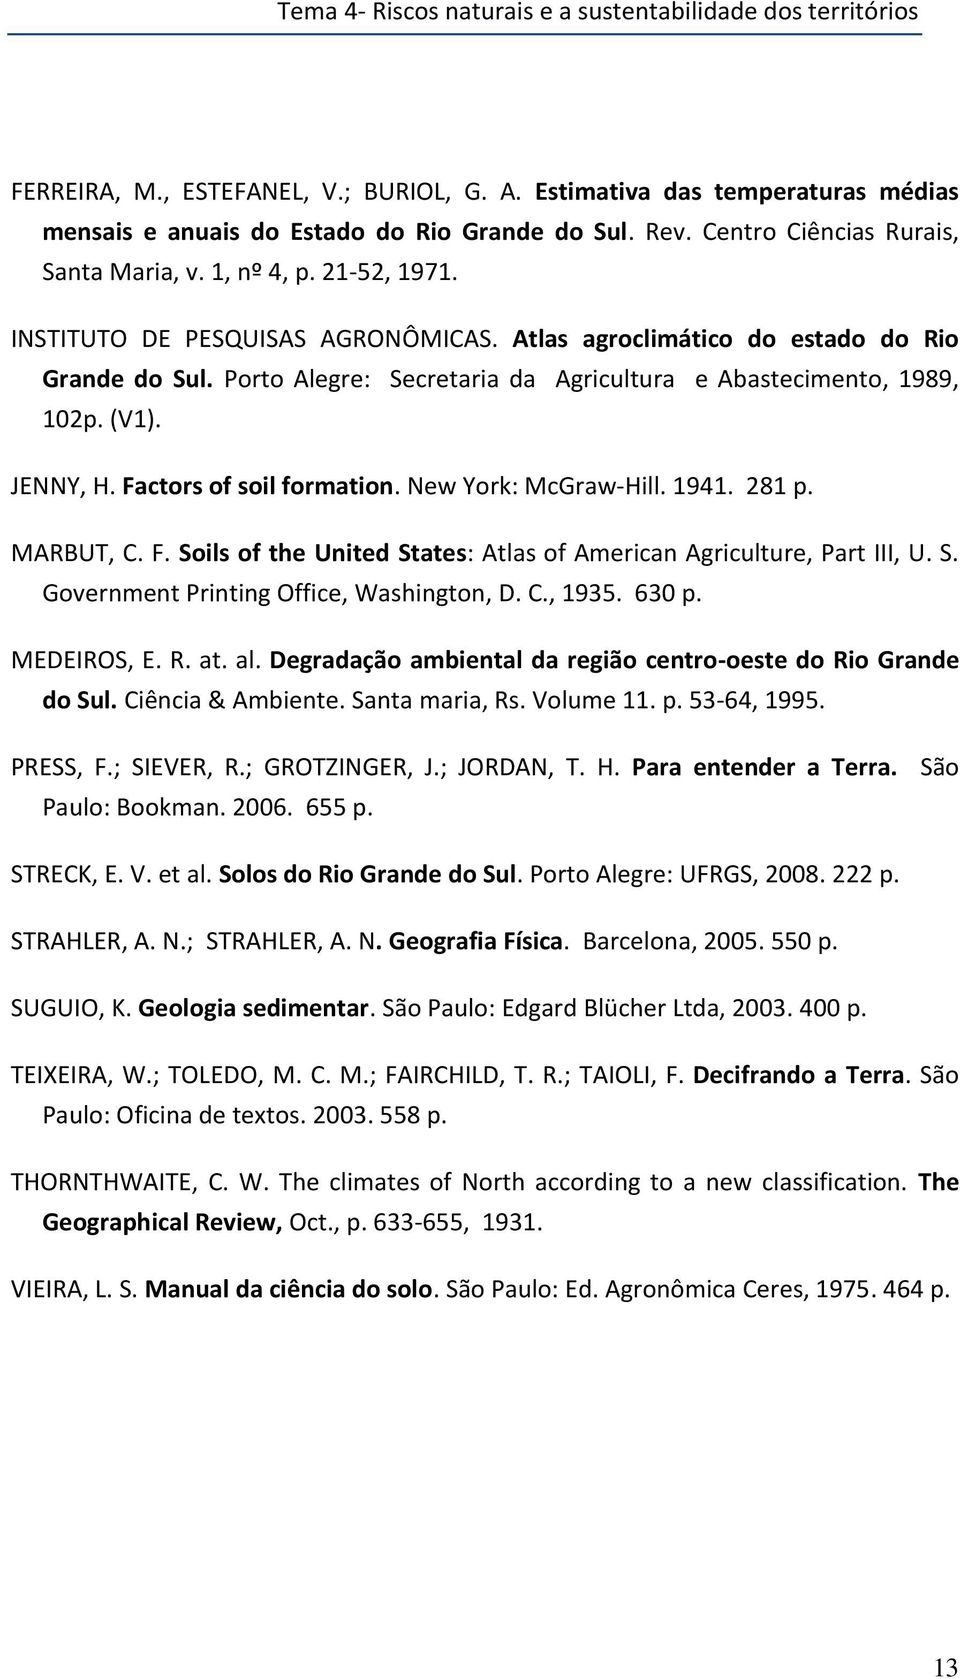 New York: McGraw-Hill. 1941. 281 p. MARBUT, C. F. Soils of the United States: Atlas of American Agriculture, Part III, U. S. Government Printing Office, Washington, D. C., 1935. 630 p. MEDEIROS, E. R.